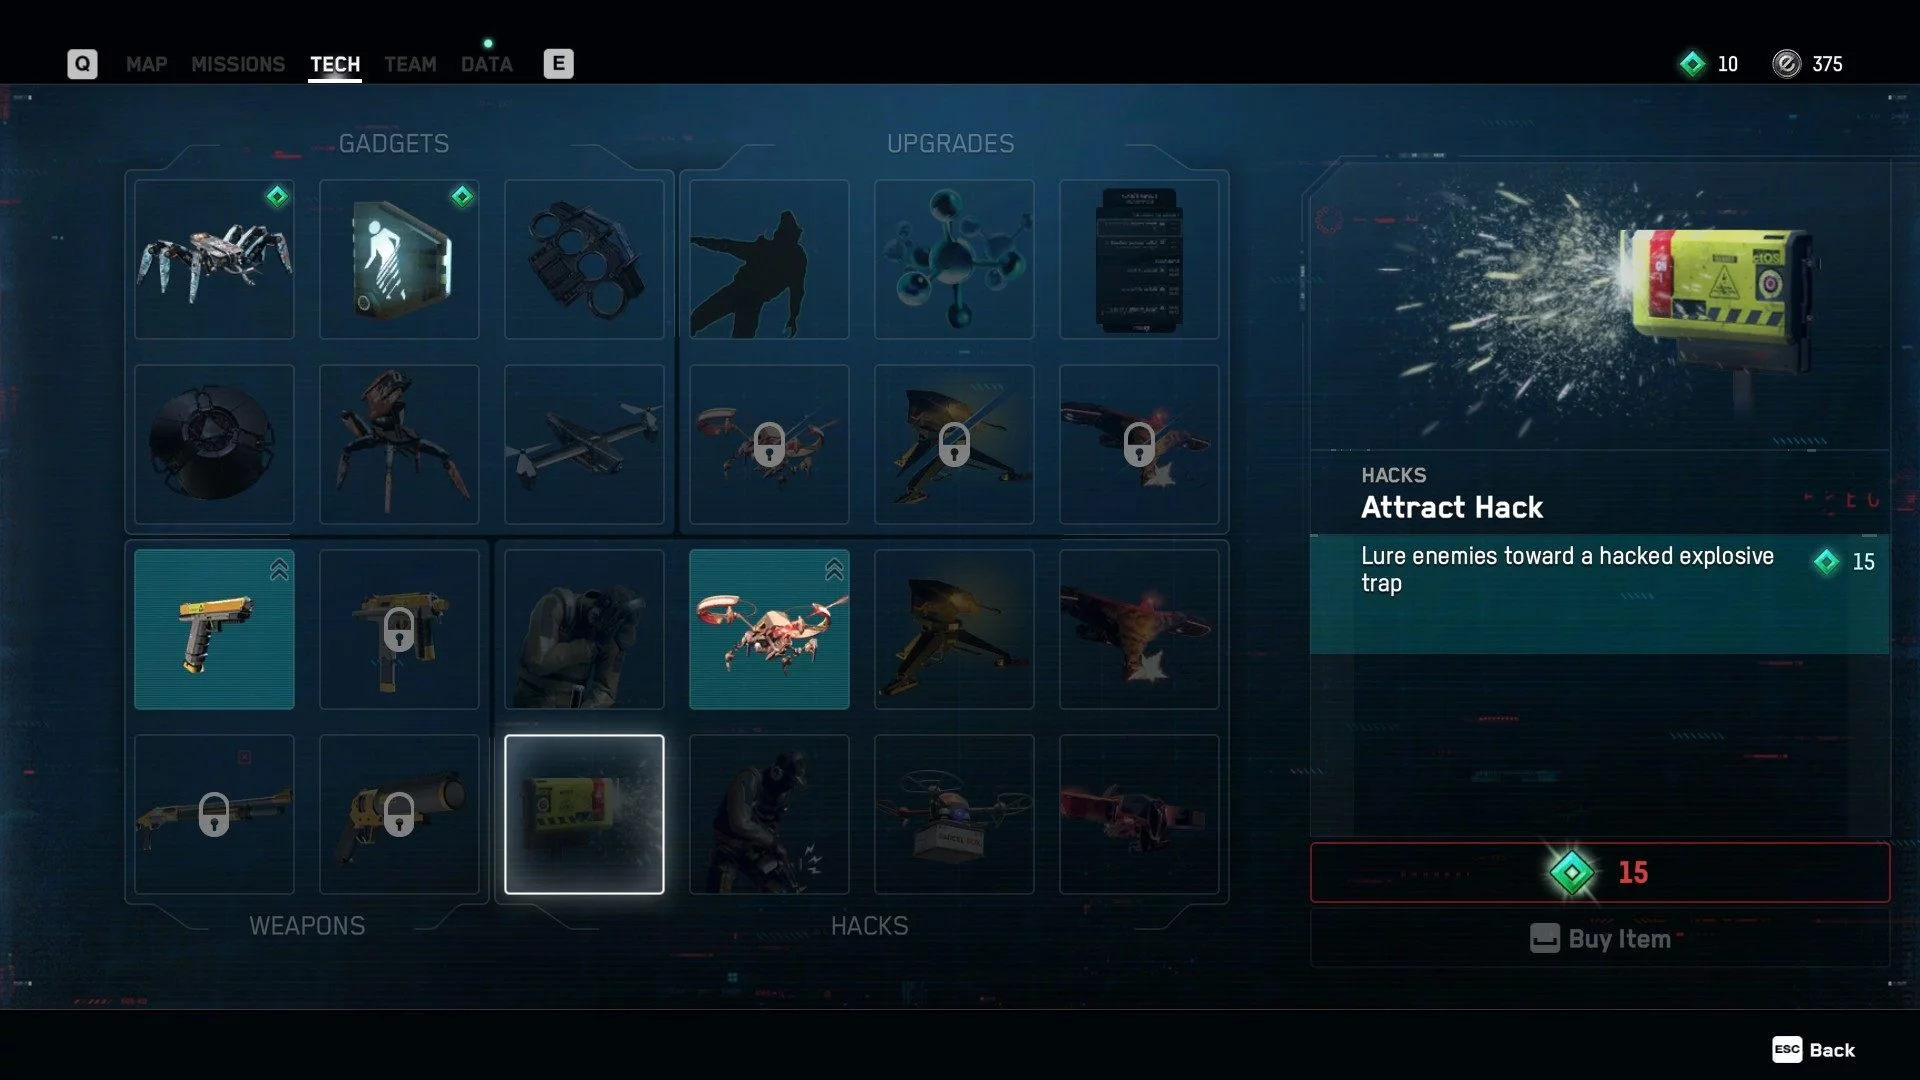 The Attract Hack in the Tech Menu in Watch Dogs Legion